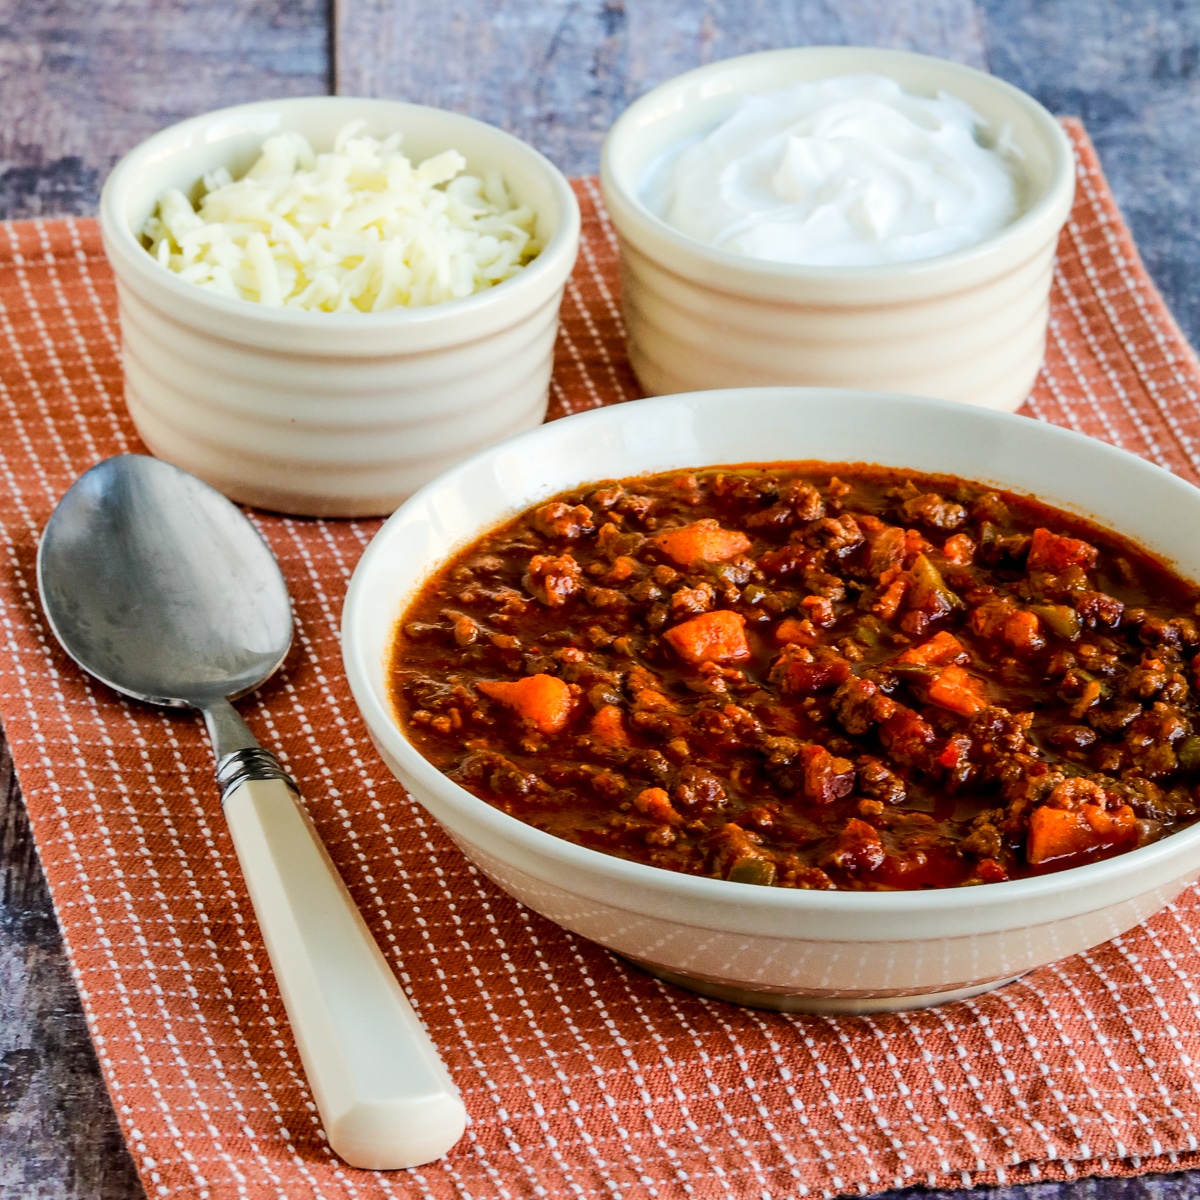 Square image for Turkey Sweet Potato Chili with bowl of chili, spoon, sour cream, and cheese on napkin.